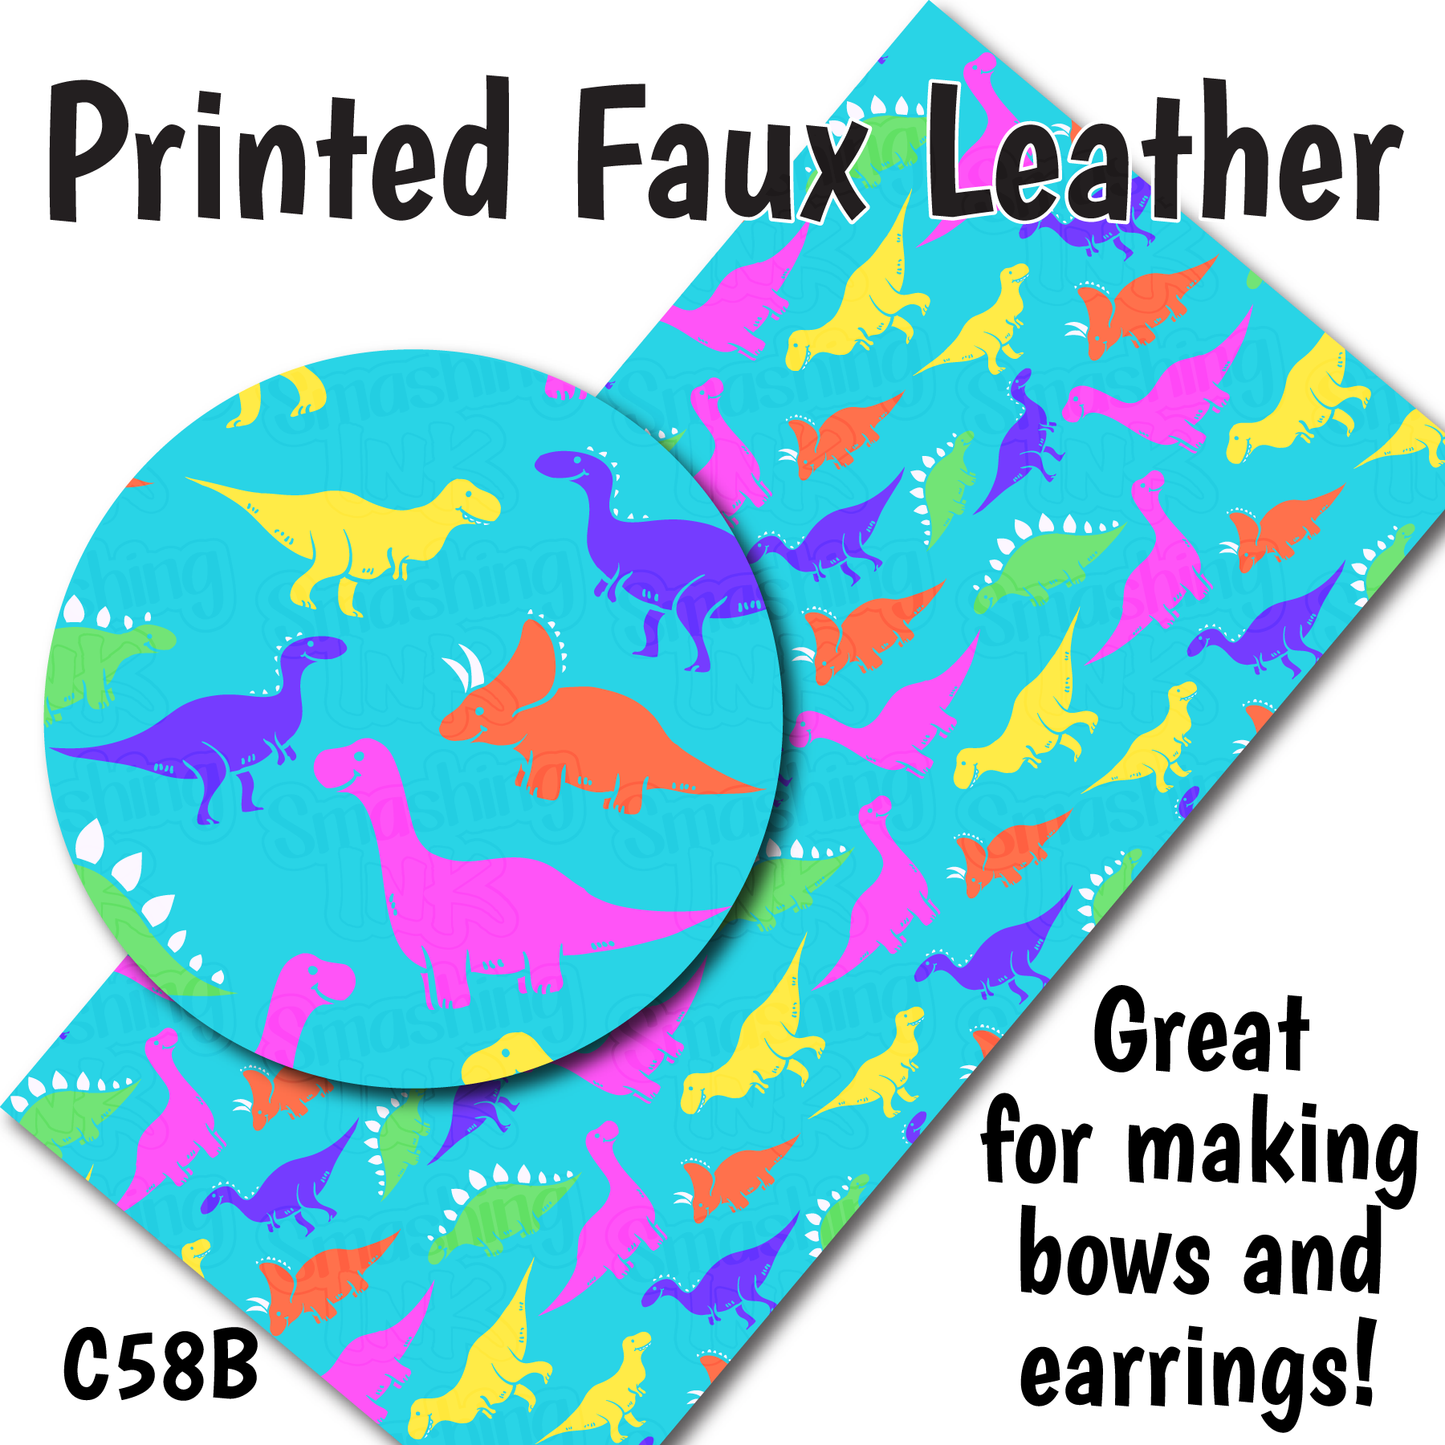 Dinosaur Pattern - Faux Leather Sheet (SHIPS IN 3 BUS DAYS)